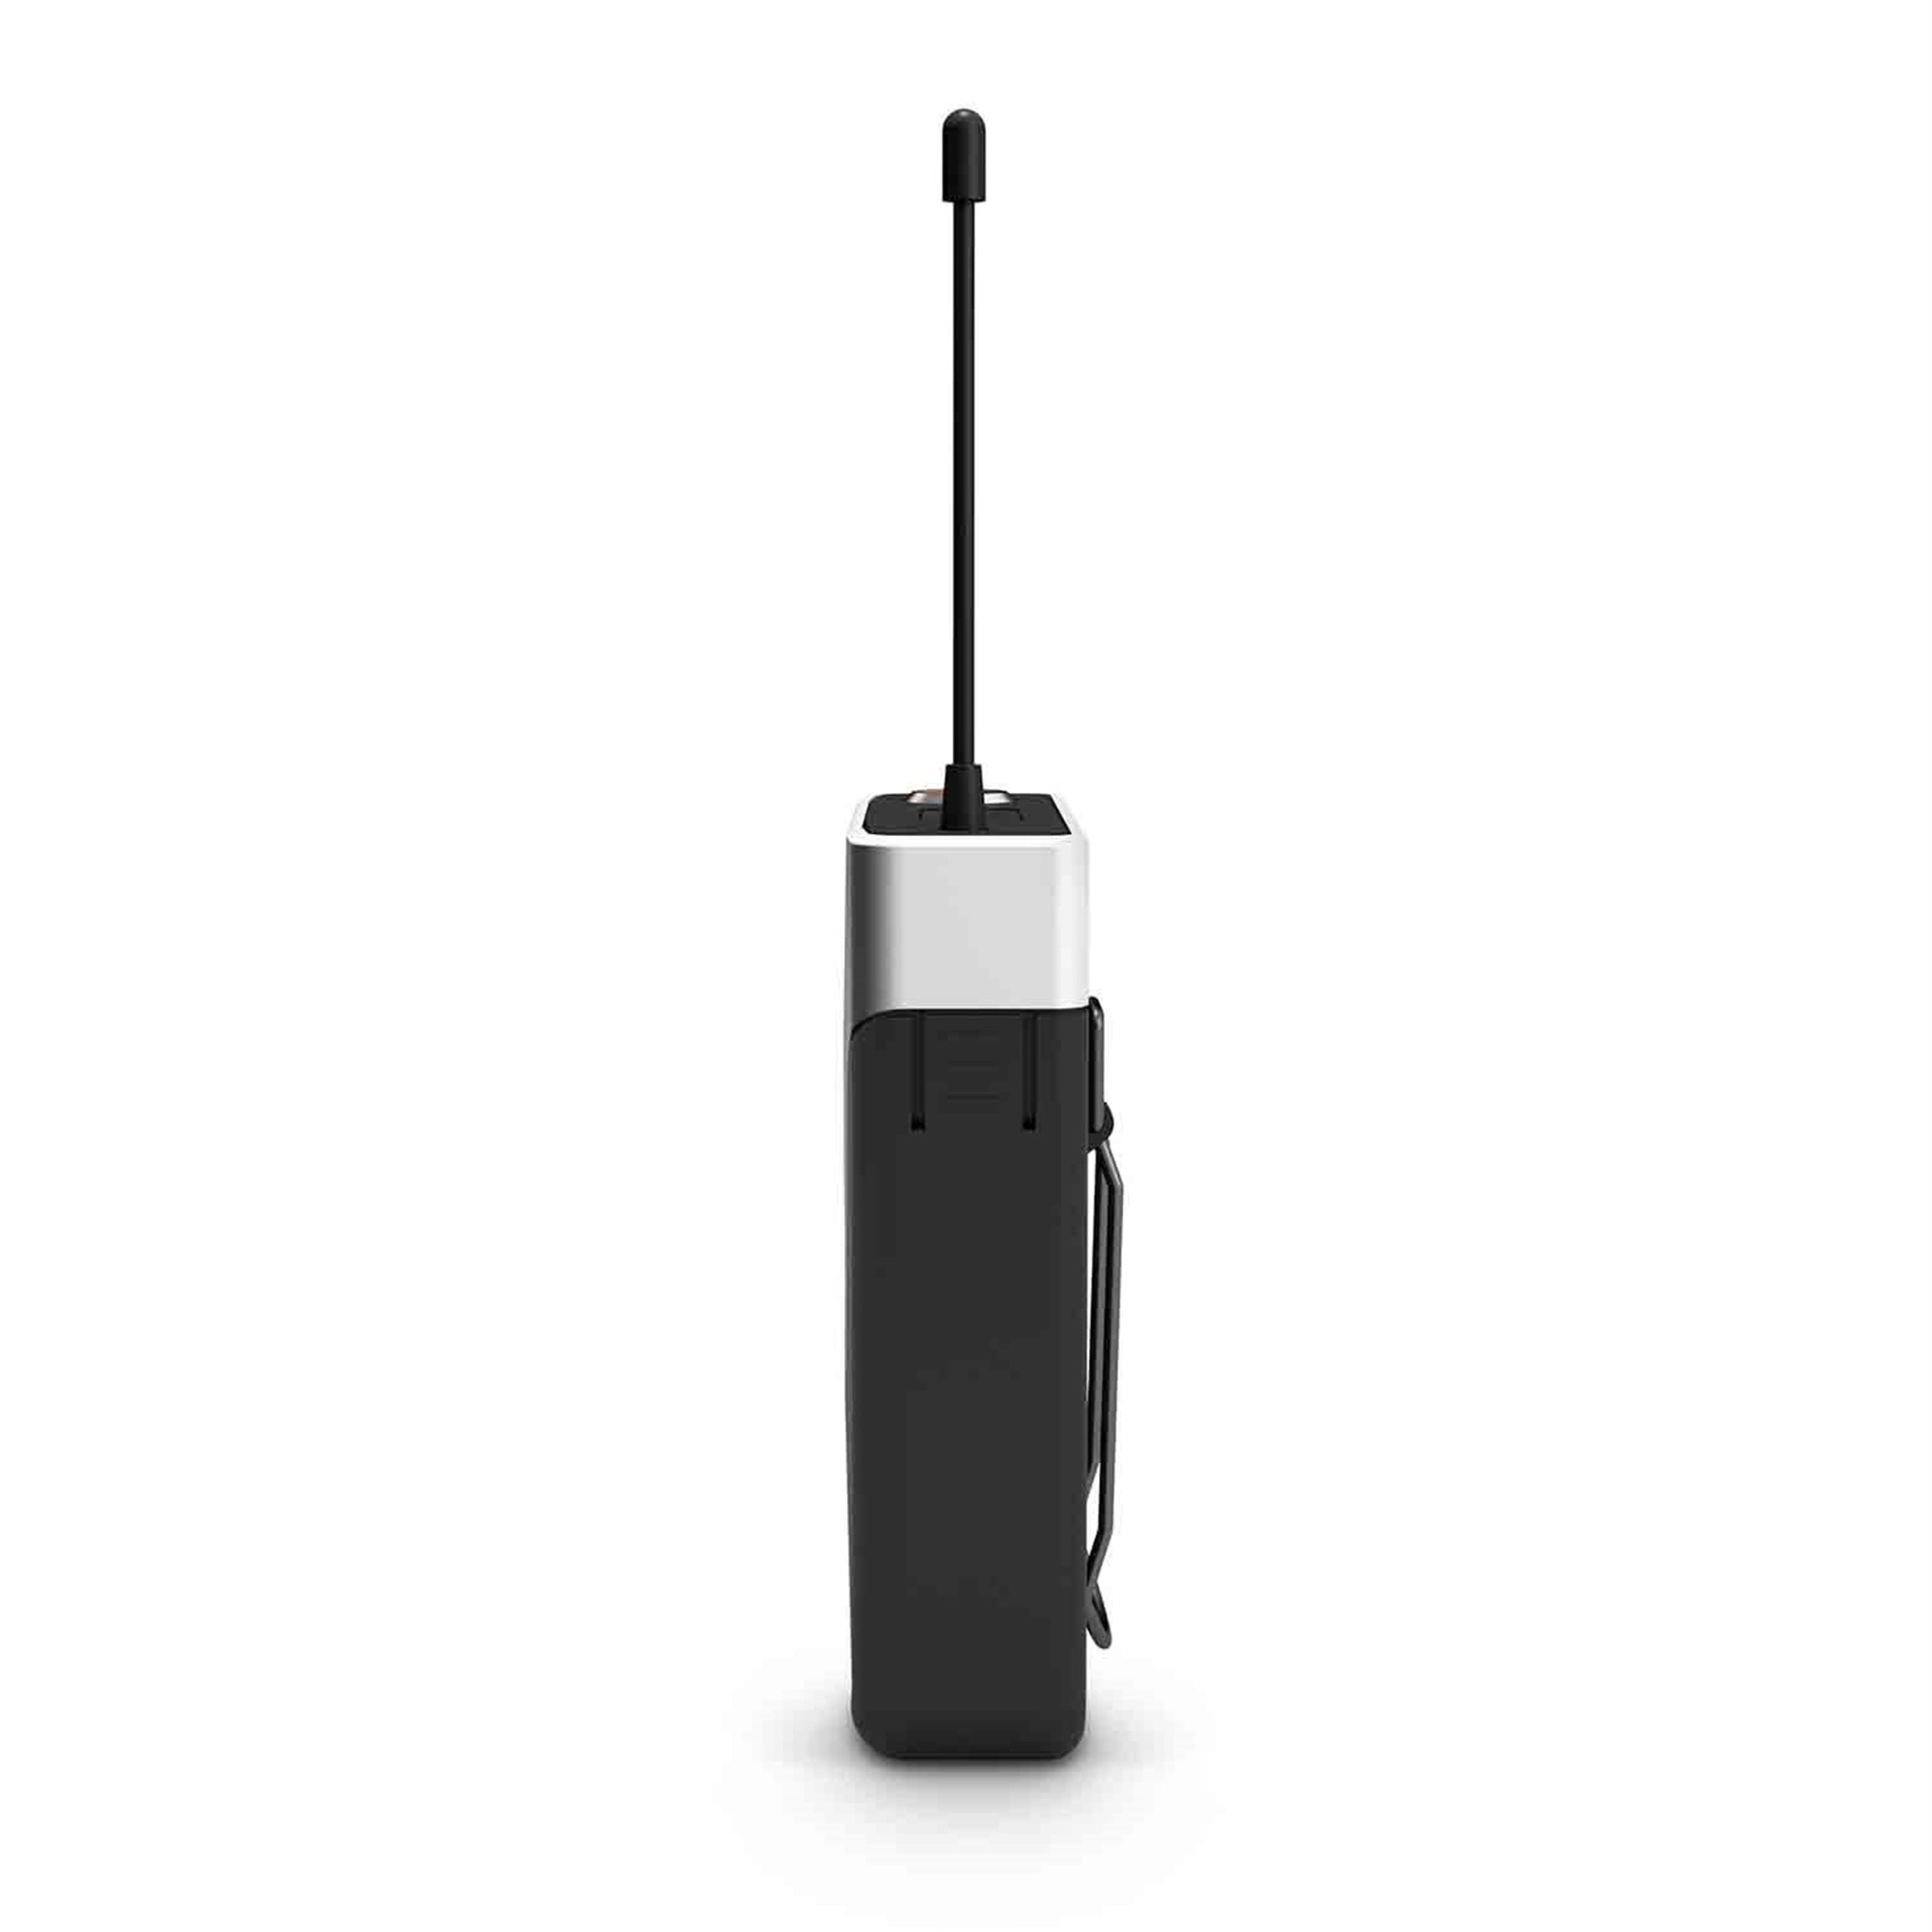 LD Systems U505 HBH 2 Wireless Microphone System with Bodypack, Headset and Dynamic Handheld Microphone by LD Systems